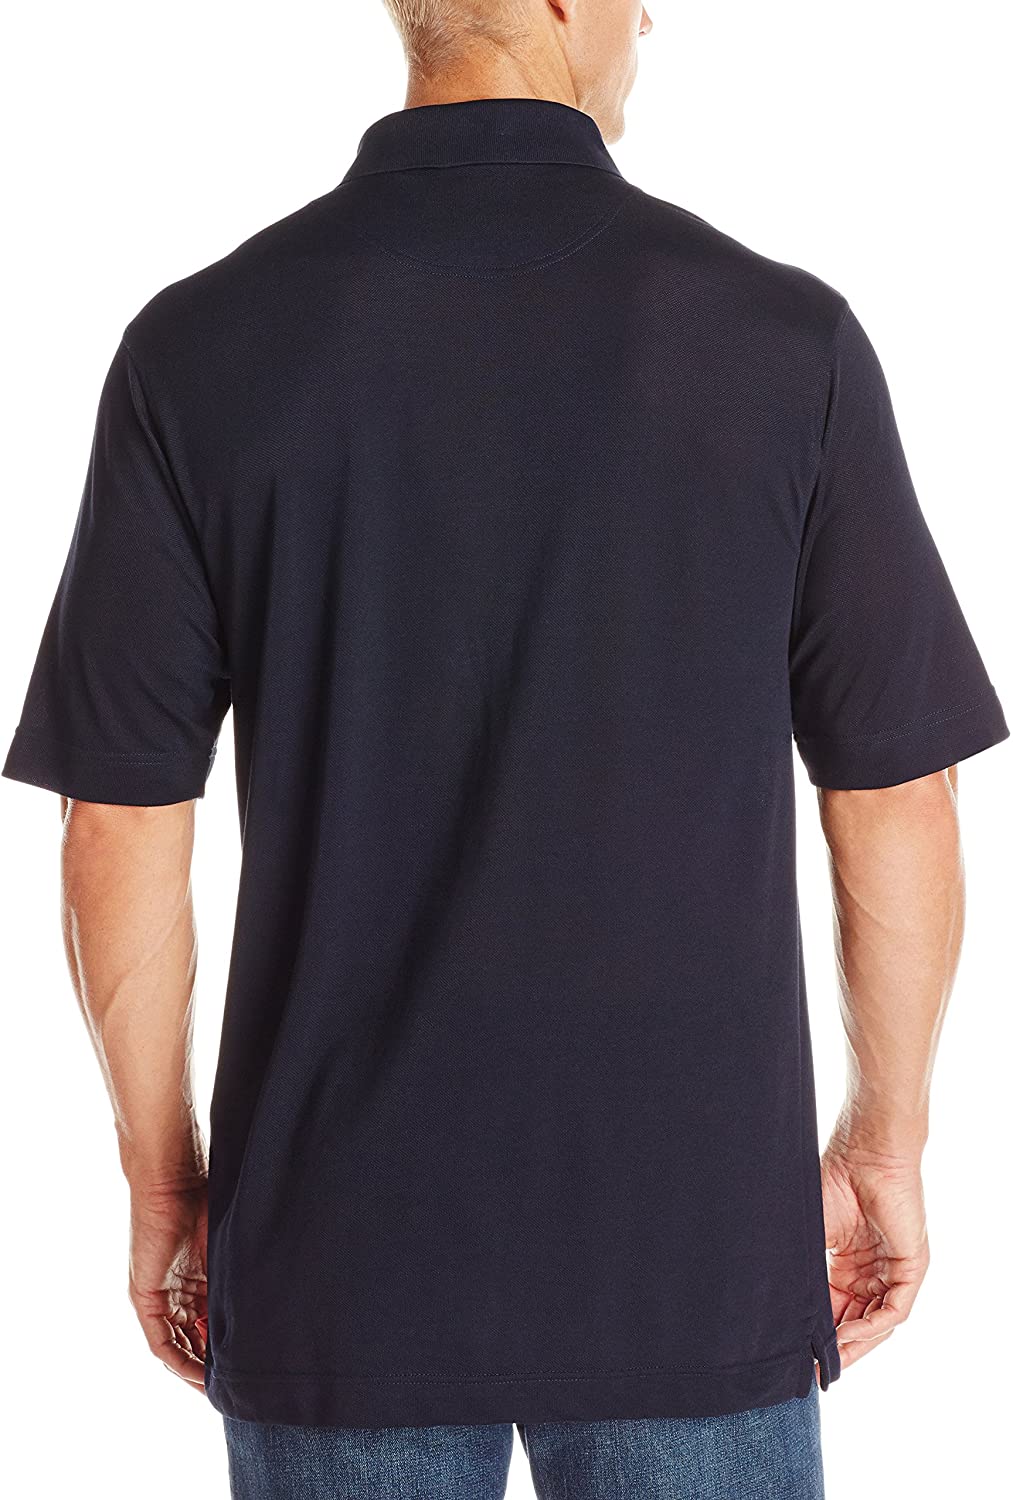 Cutter &amp; Buck Men's Big and Tall CB DryTec Championship Polo, Navy Blue - 4XB - image 2 of 2